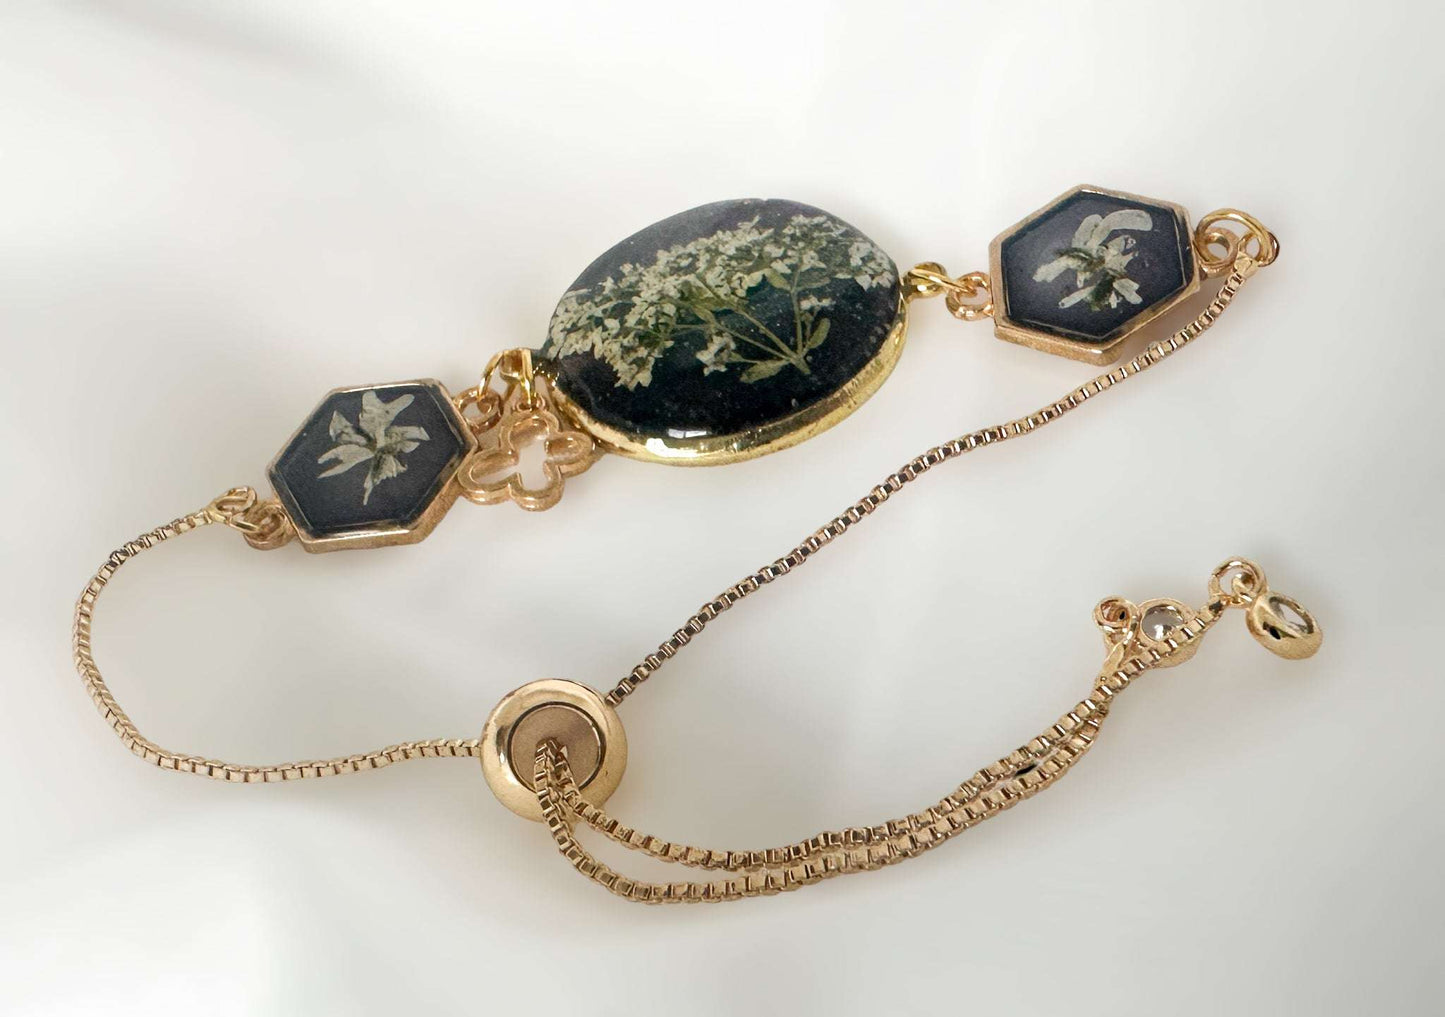 Bracelet Handcrafted with Resin and Dried Flowers -Gold Elegance 